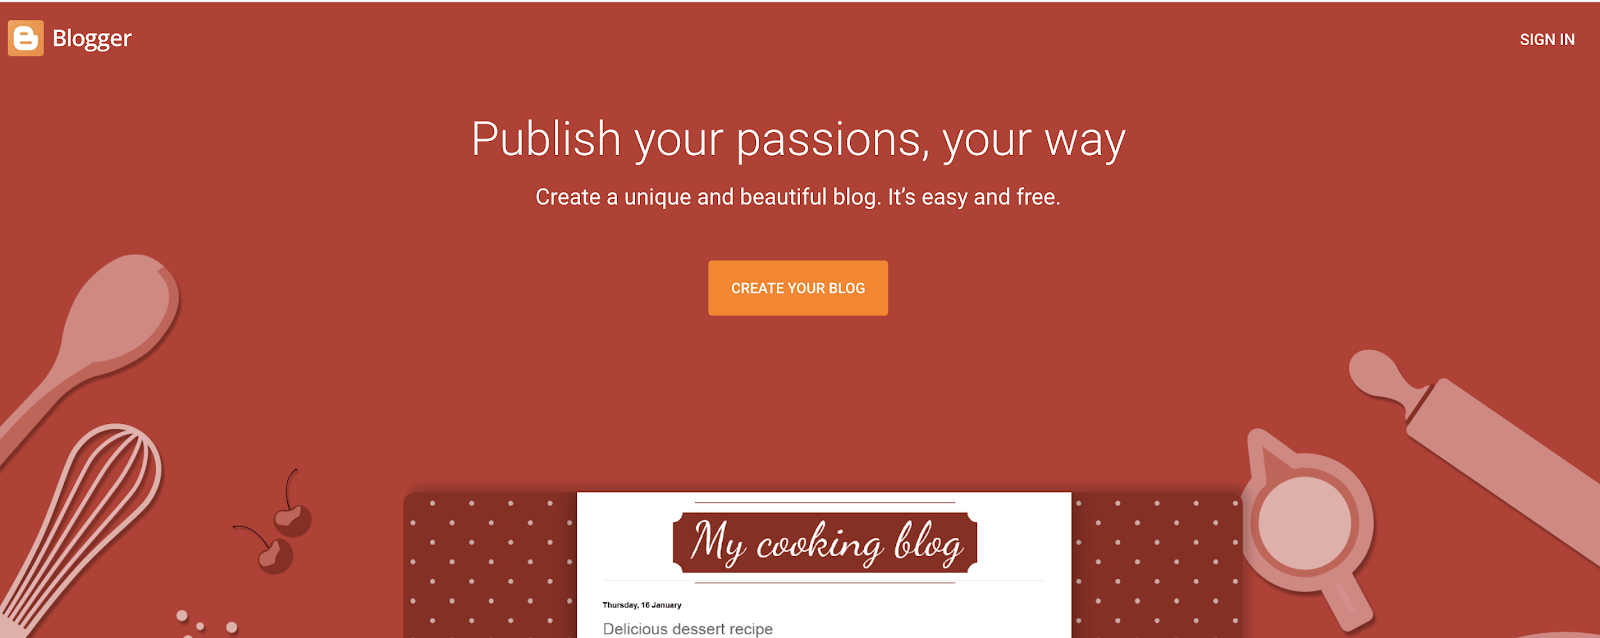 Blogger as a Free Blog Site to Use for Building a Blog for Free